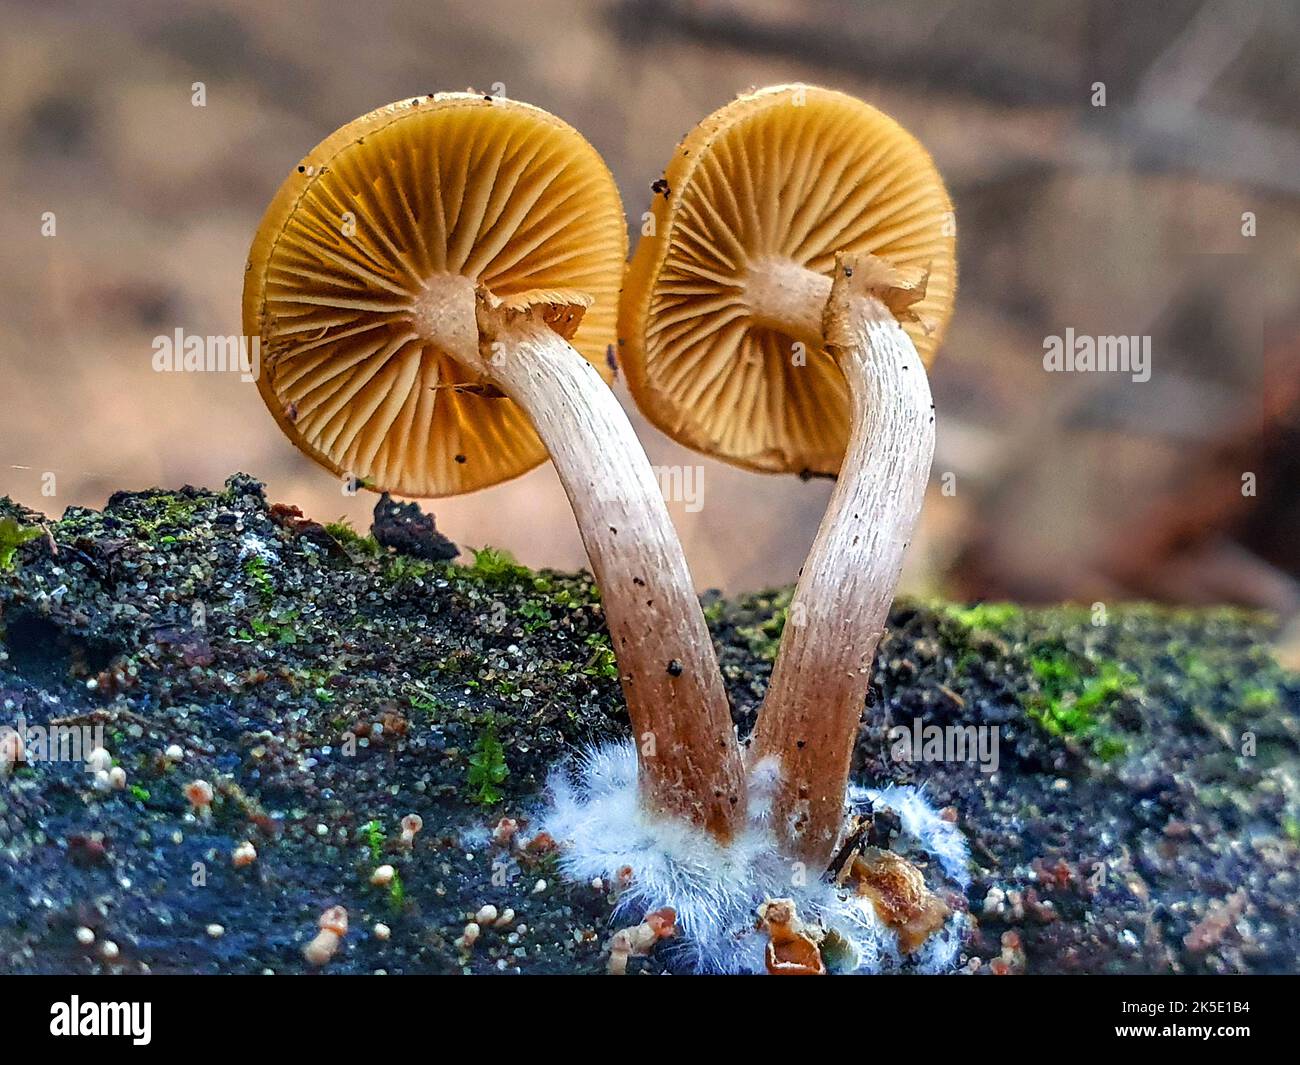 Galerina patagonica is a species of agaric fungus in the family Hymenogastraceae. First described by mycologist Rolf Singer in 1953, it has a Gondwanan distribution, and is found in Australia, New Zealand, and Patagonia (South America), where it grows on rotting wood. The fungus contains a laccase enzyme that has been investigated for possible used in bioremediation of chlorophenol-polluted environments.?Credit: BSpragg Stock Photo